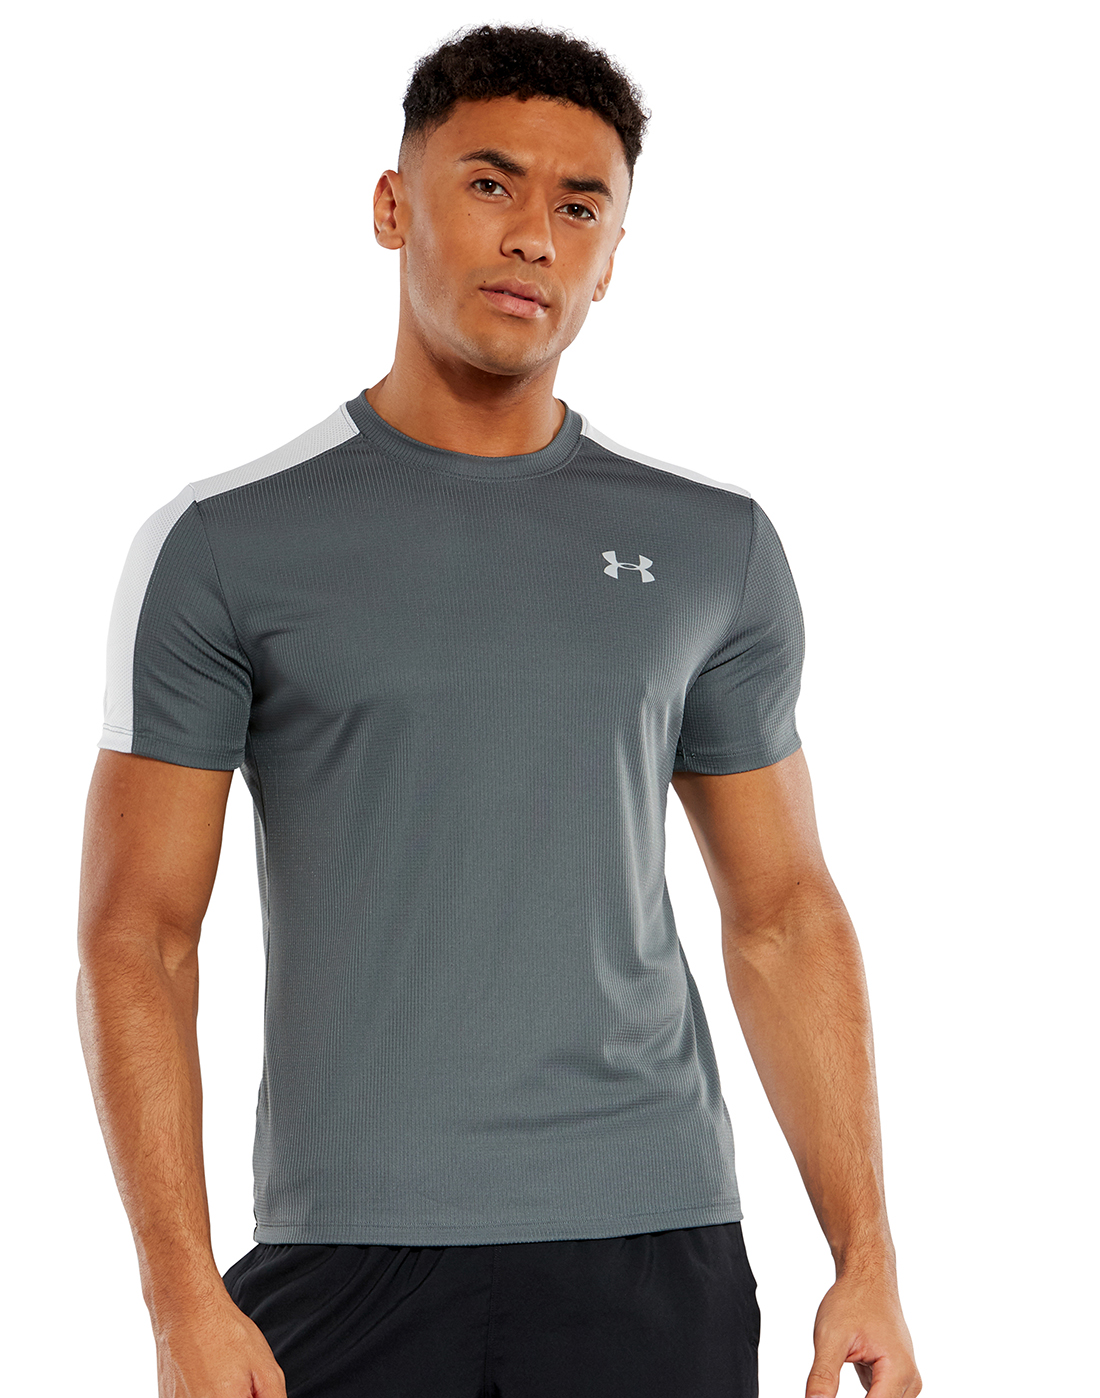 Under Armour Mens Speed Stride T-Shirt - Grey | Life Style Sports IE